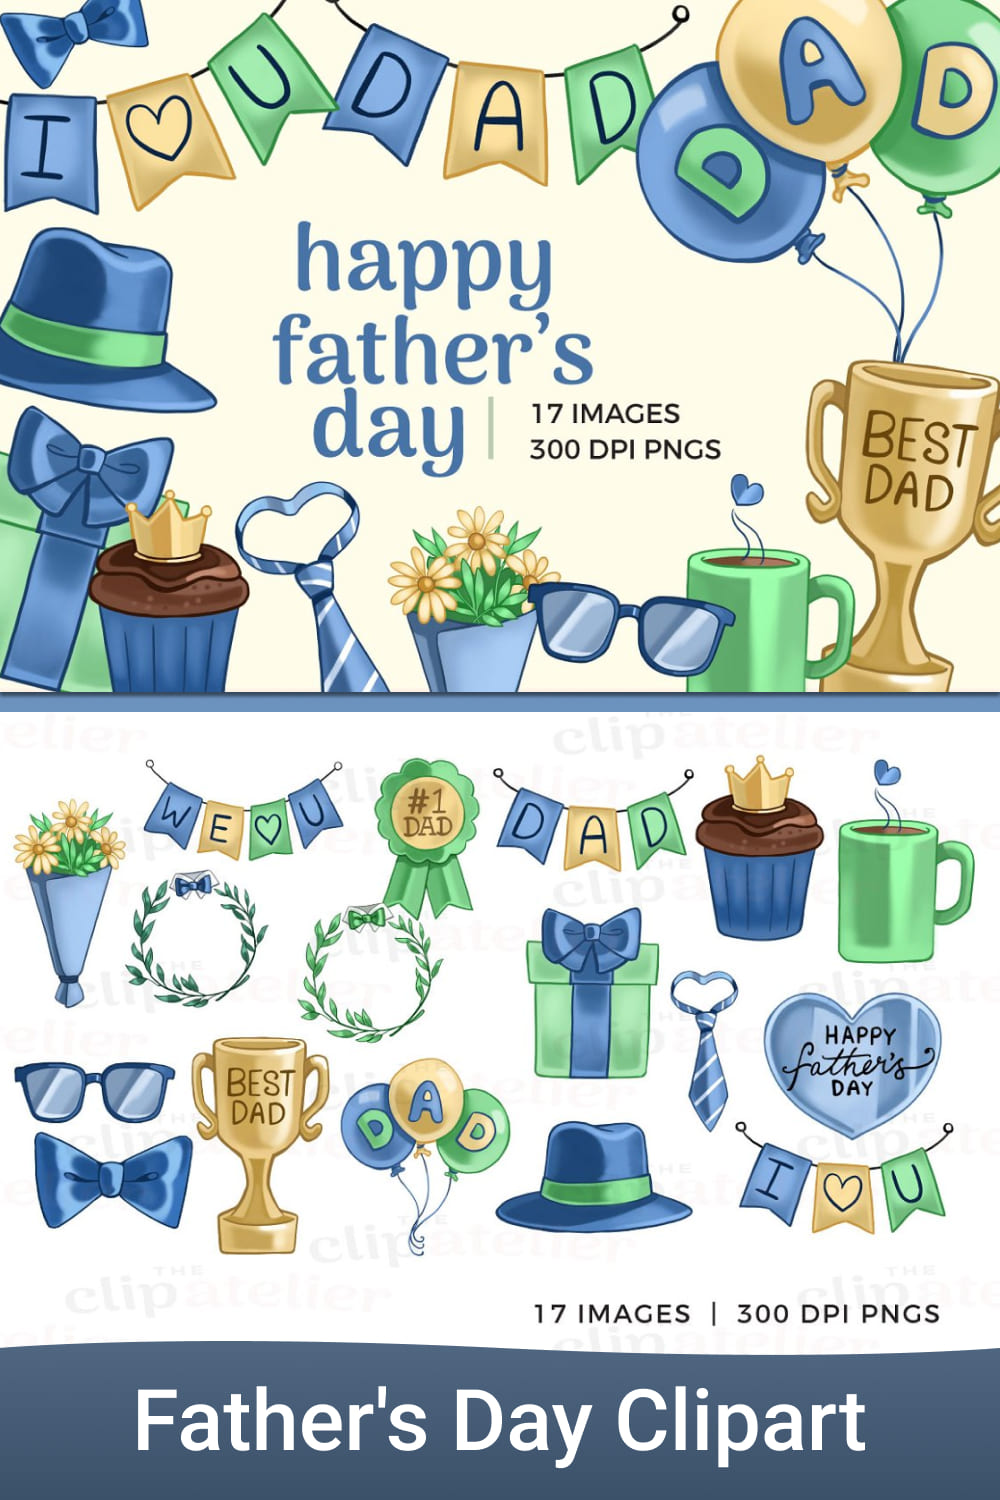 Father s day clipart - pinterest image preview.